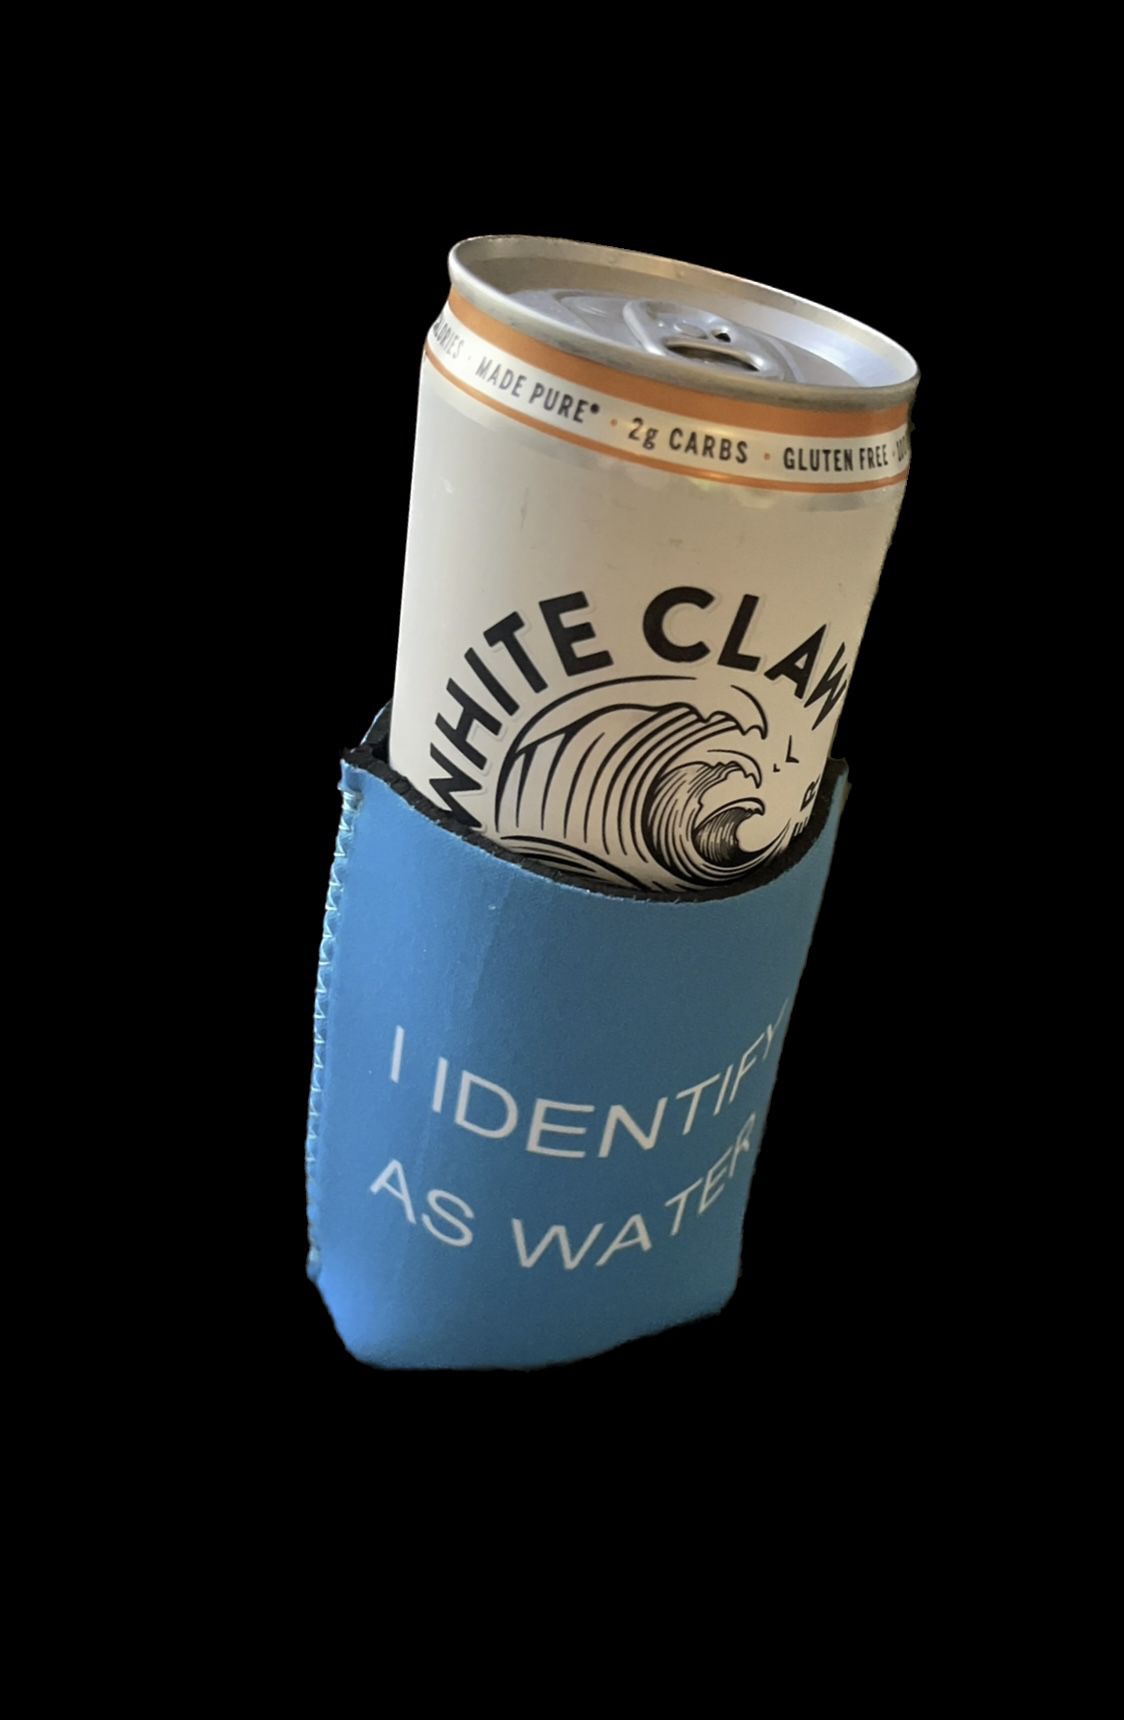 I Identify As Water Koozie/ Can Cooler